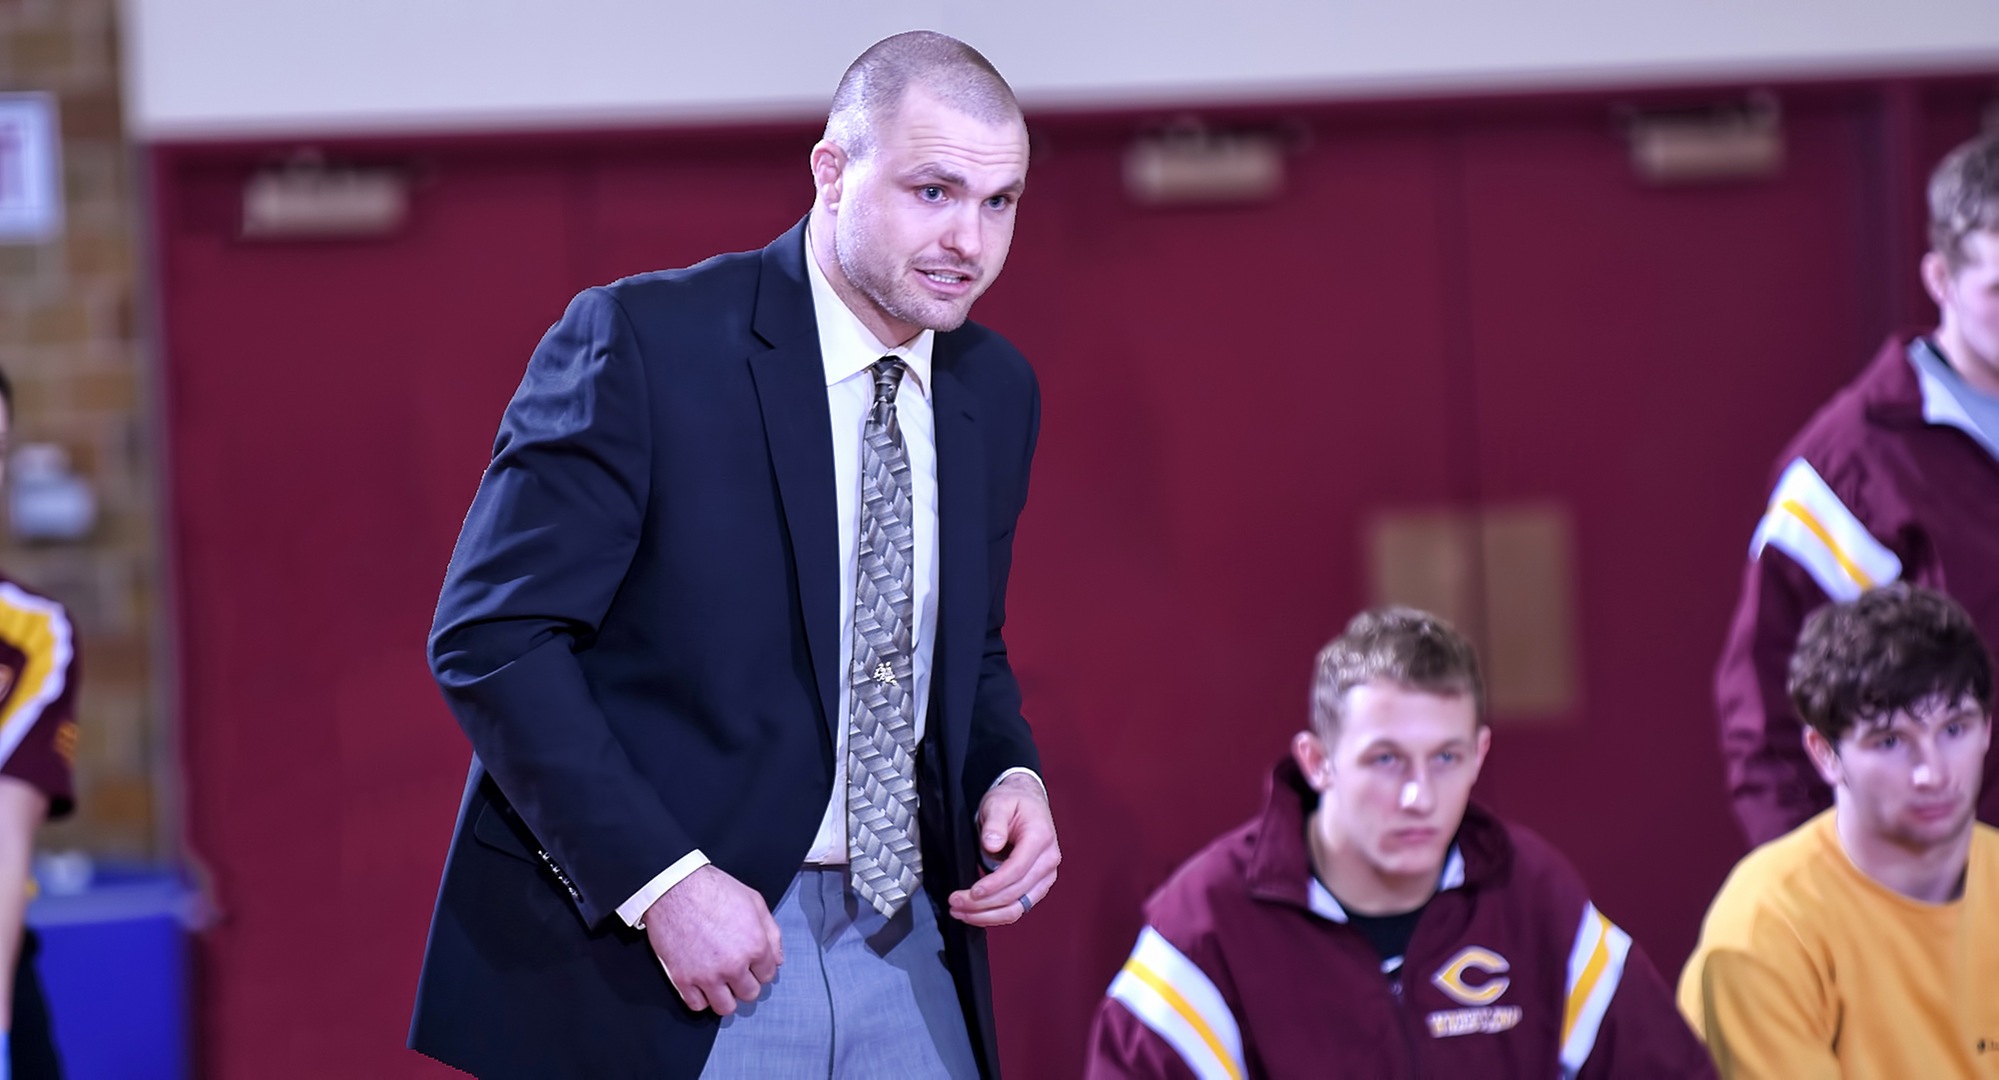 Concordia wrestling head coach Phil Moenkedick announced his resignation to take the position as Dean of Students at Perham HS.